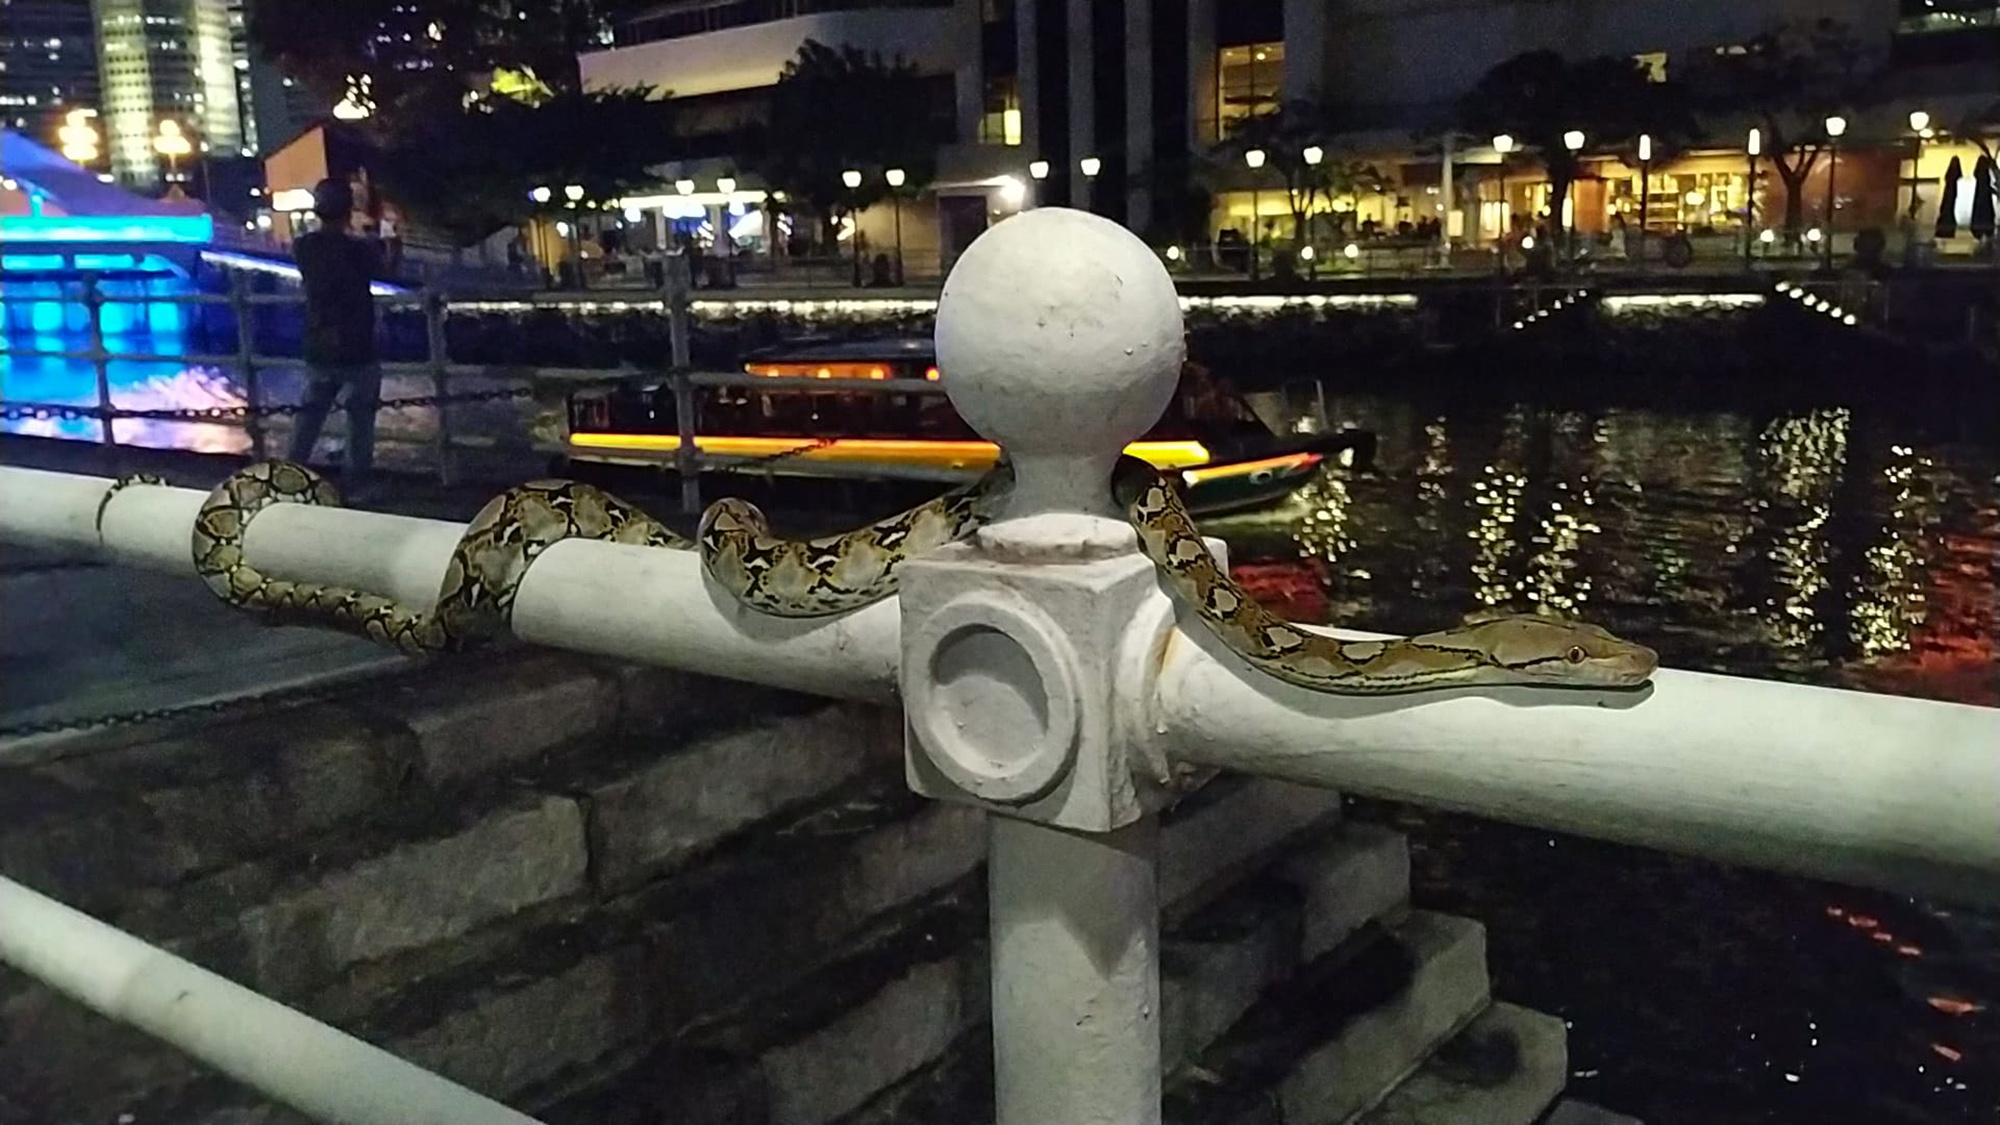 Read more about the article Python Filmed Relaxing On Quay By The Water In Singapore